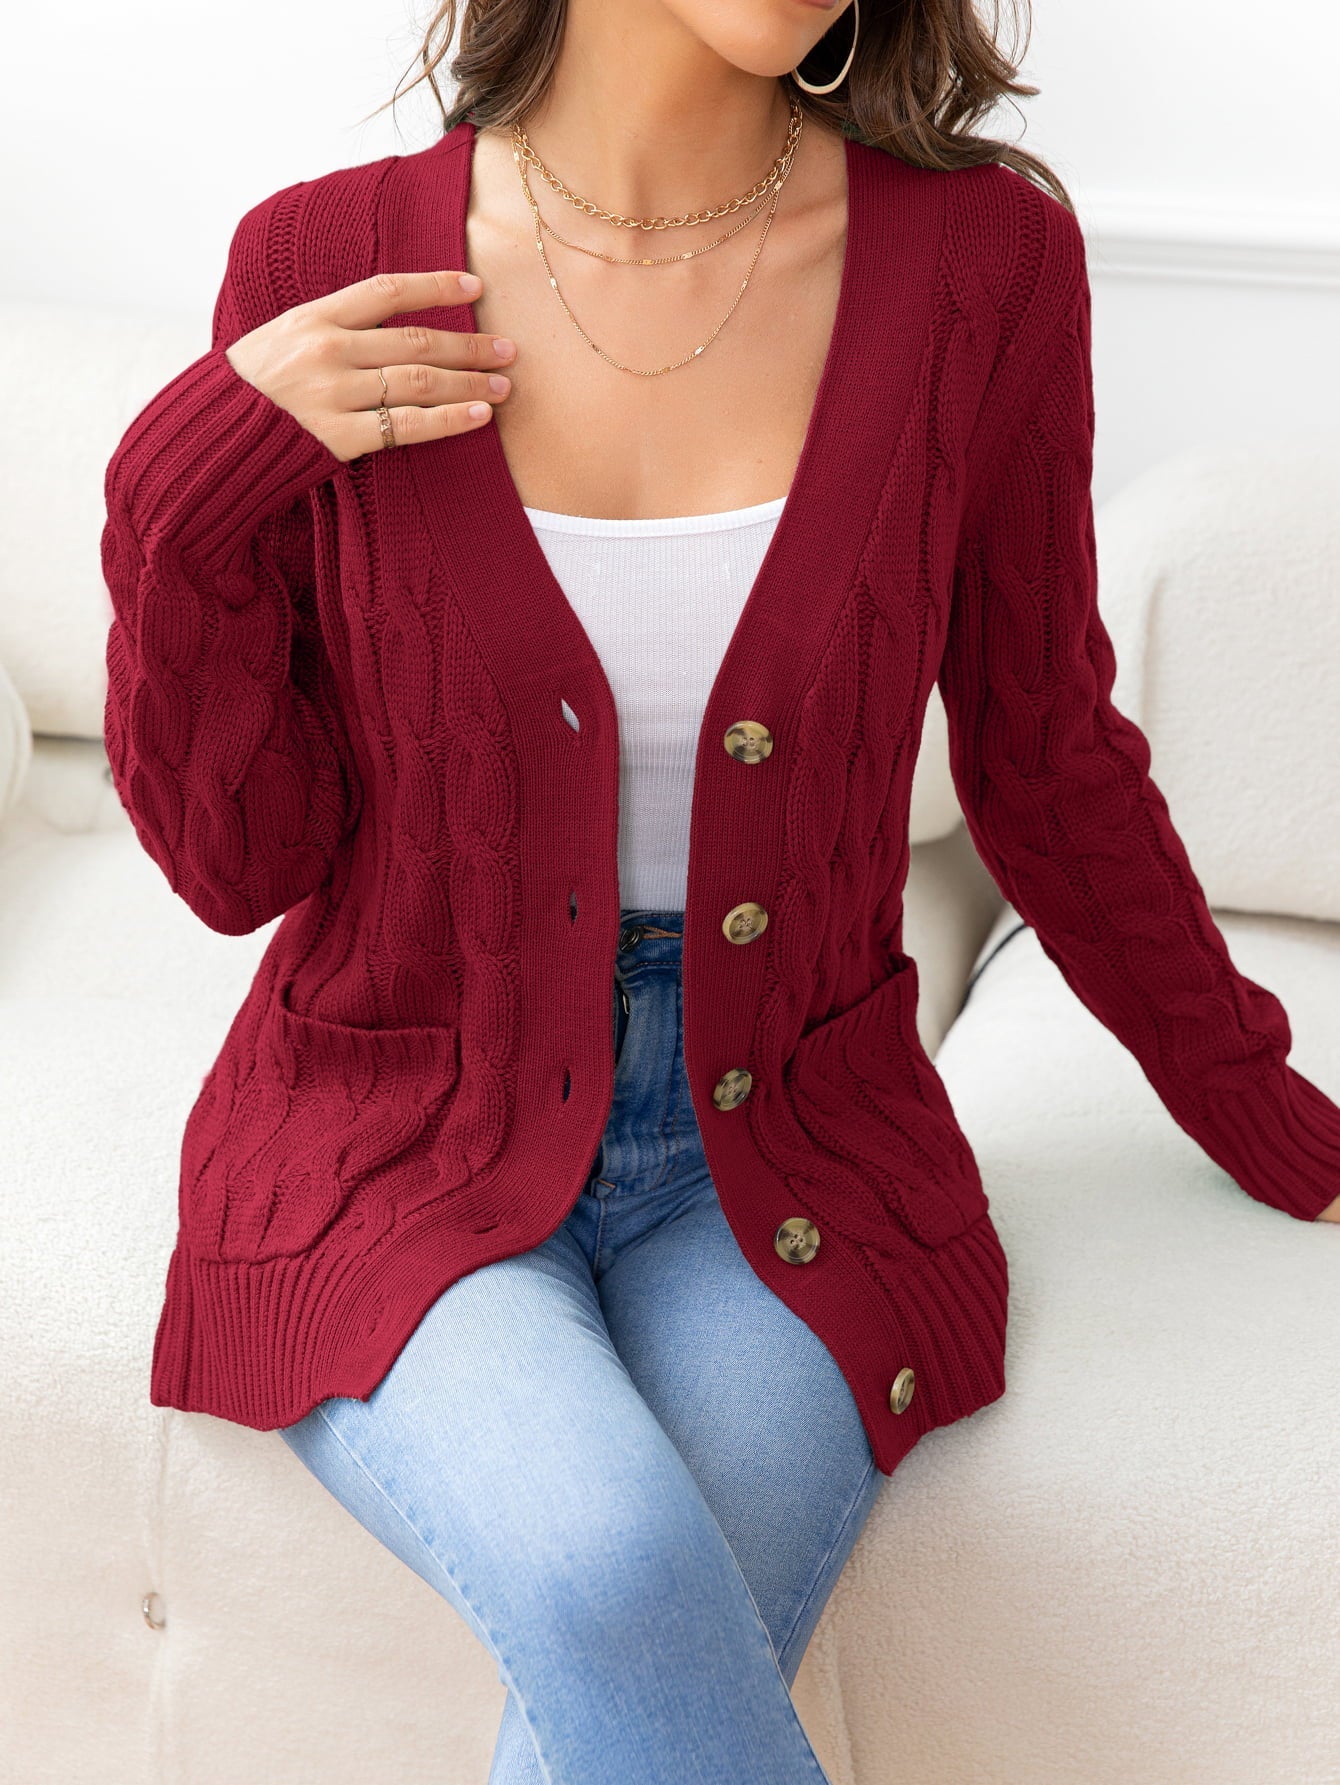 Button Down Cable-Knit Cardigan - Dark Red / S - Women’s Clothing & Accessories - Shirts & Tops - 46 - 2024